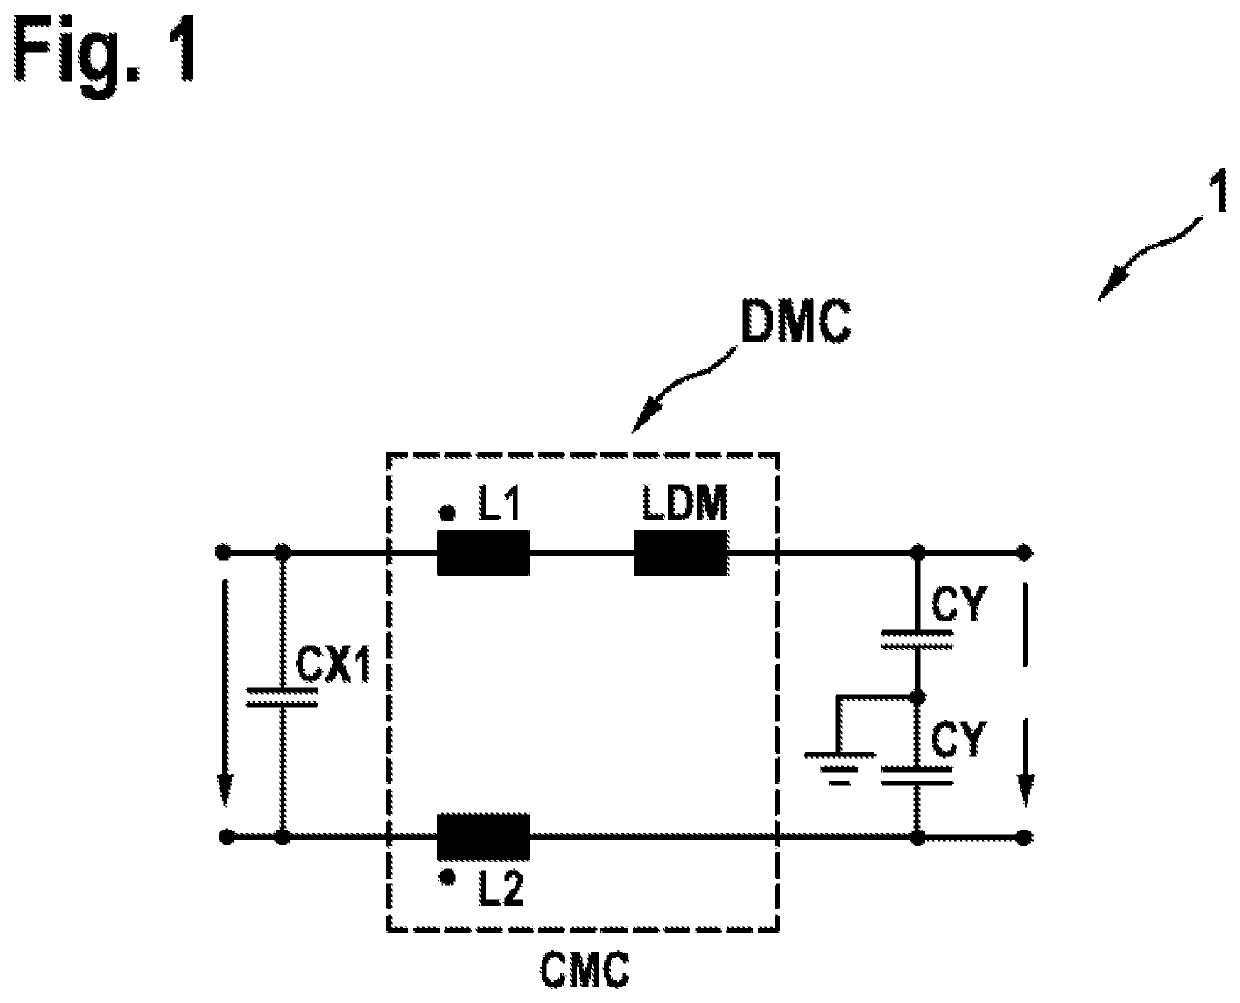 Common-mode/differential-mode throttle for an electrically driveable motor vehicle